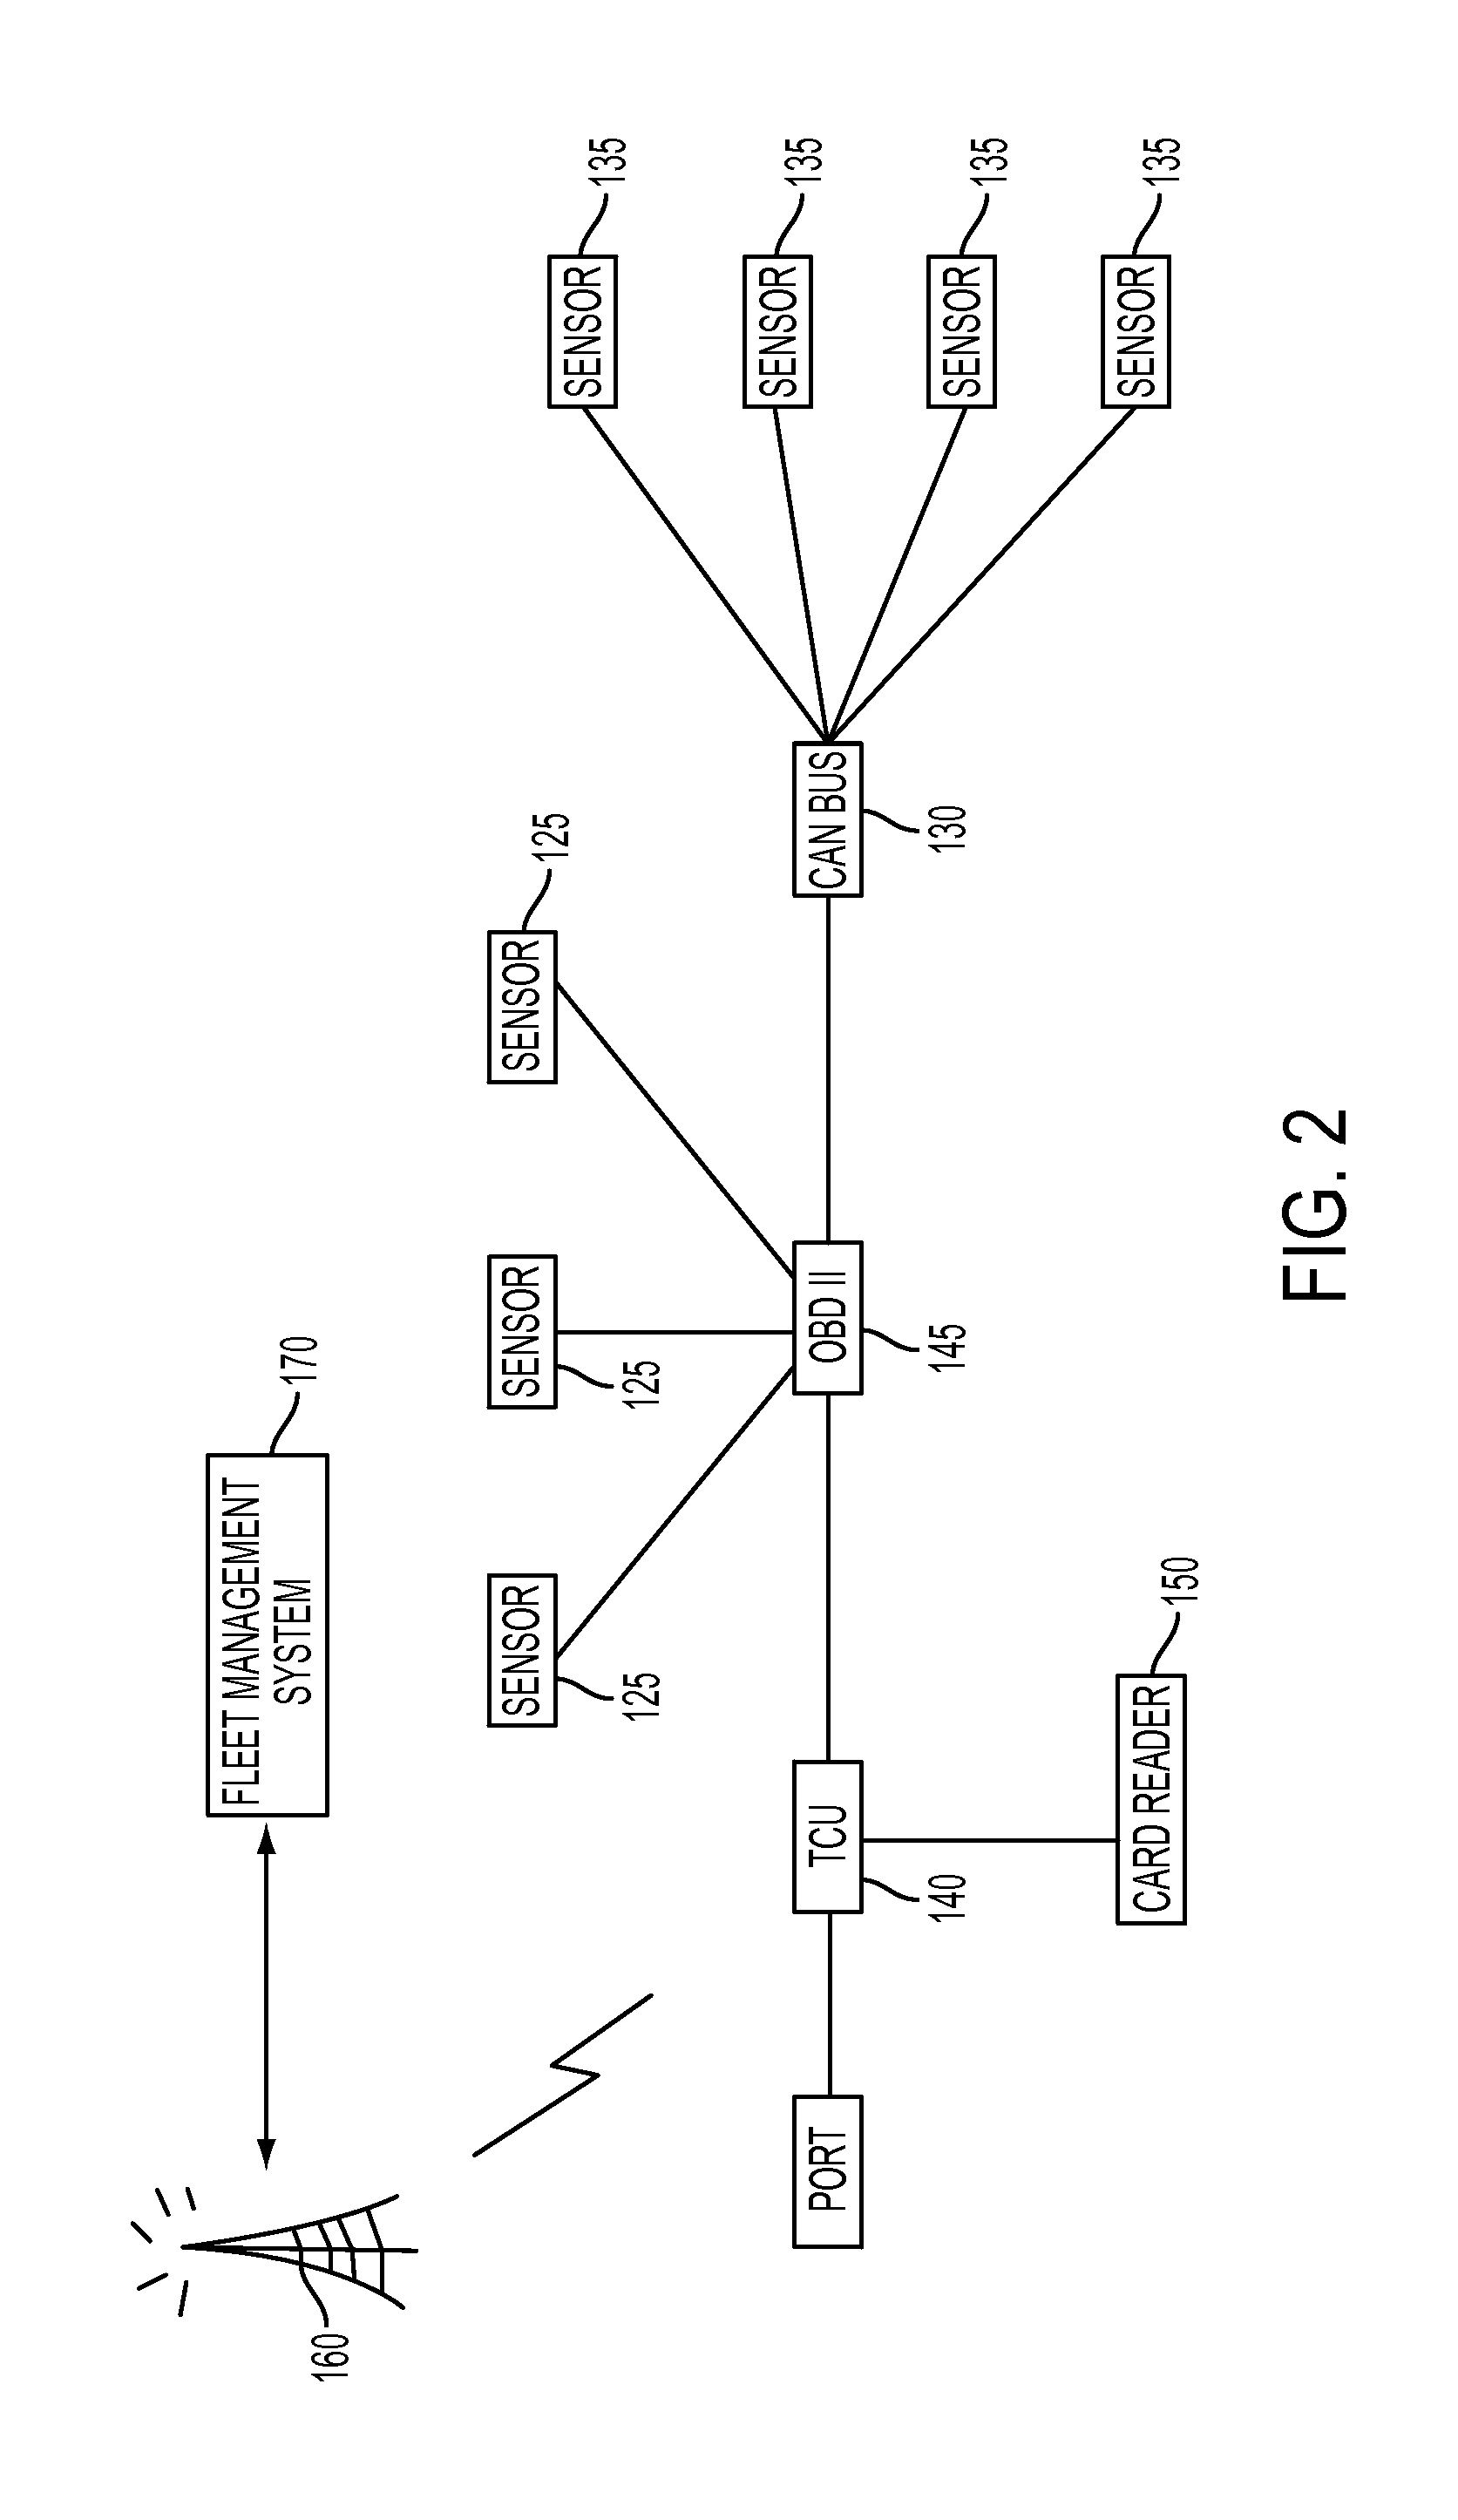 Telematics System, Methods and Apparatus for Two-way Data Communication Between Vehicles in a Fleet and a Fleet Management System